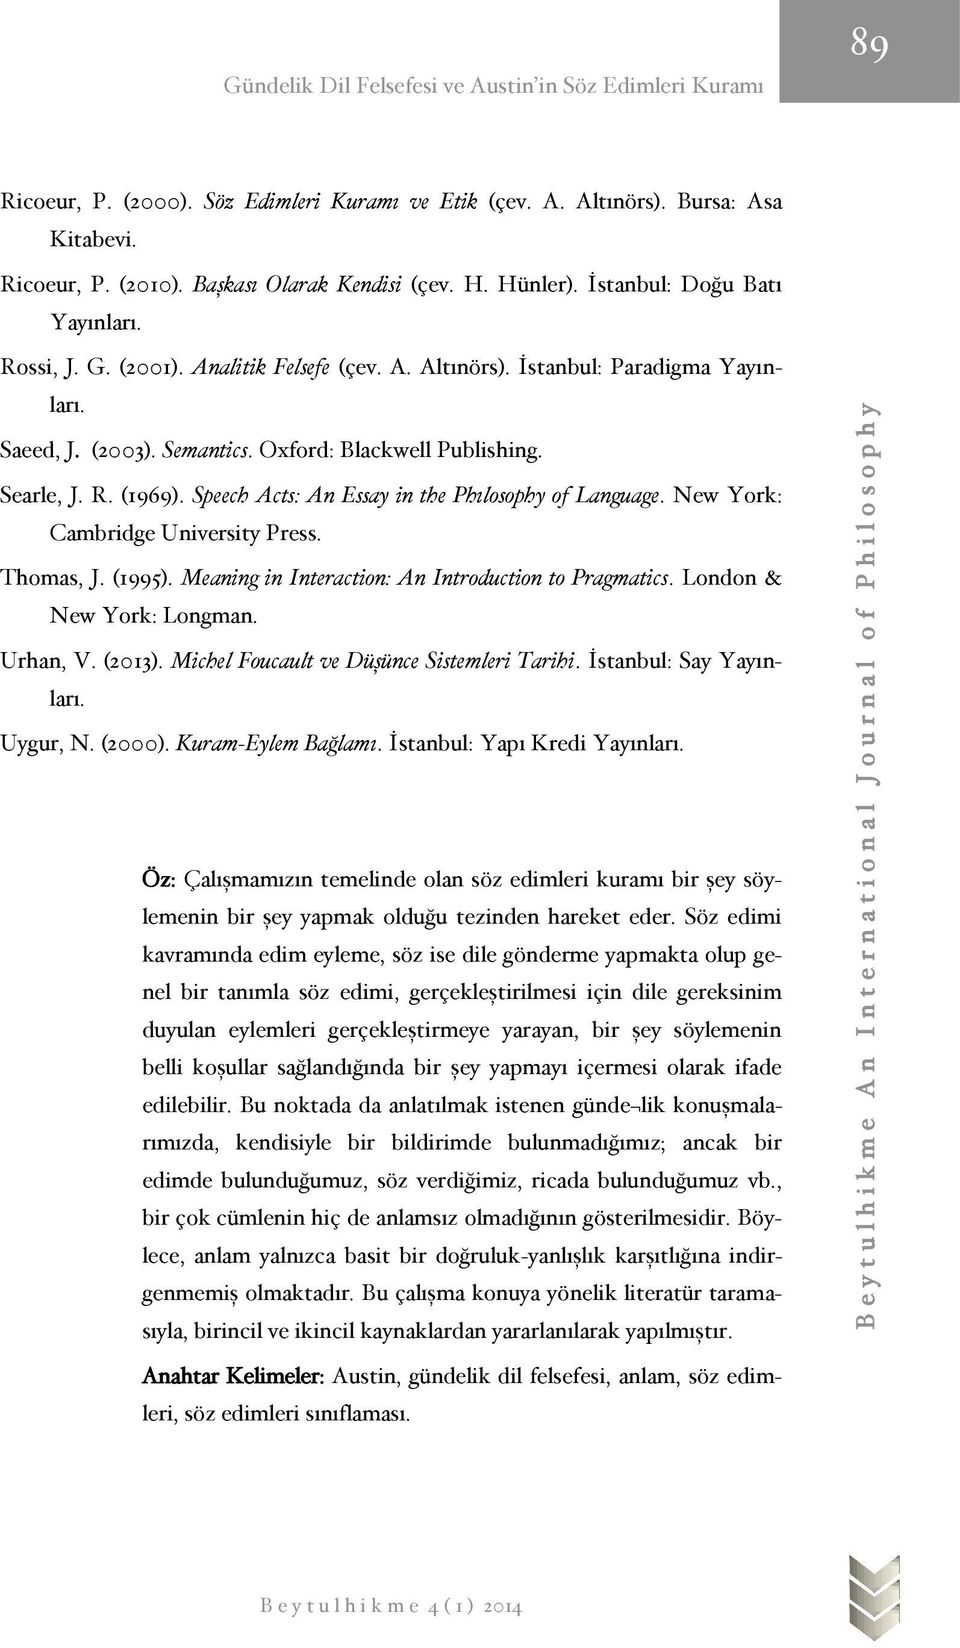 Speech Acts: An Essay in the Phılosophy of Language. New York: Cambridge University Press. Thomas, J. (1995). Meaning in Interaction: An Introduction to Pragmatics. London & New York: Longman.